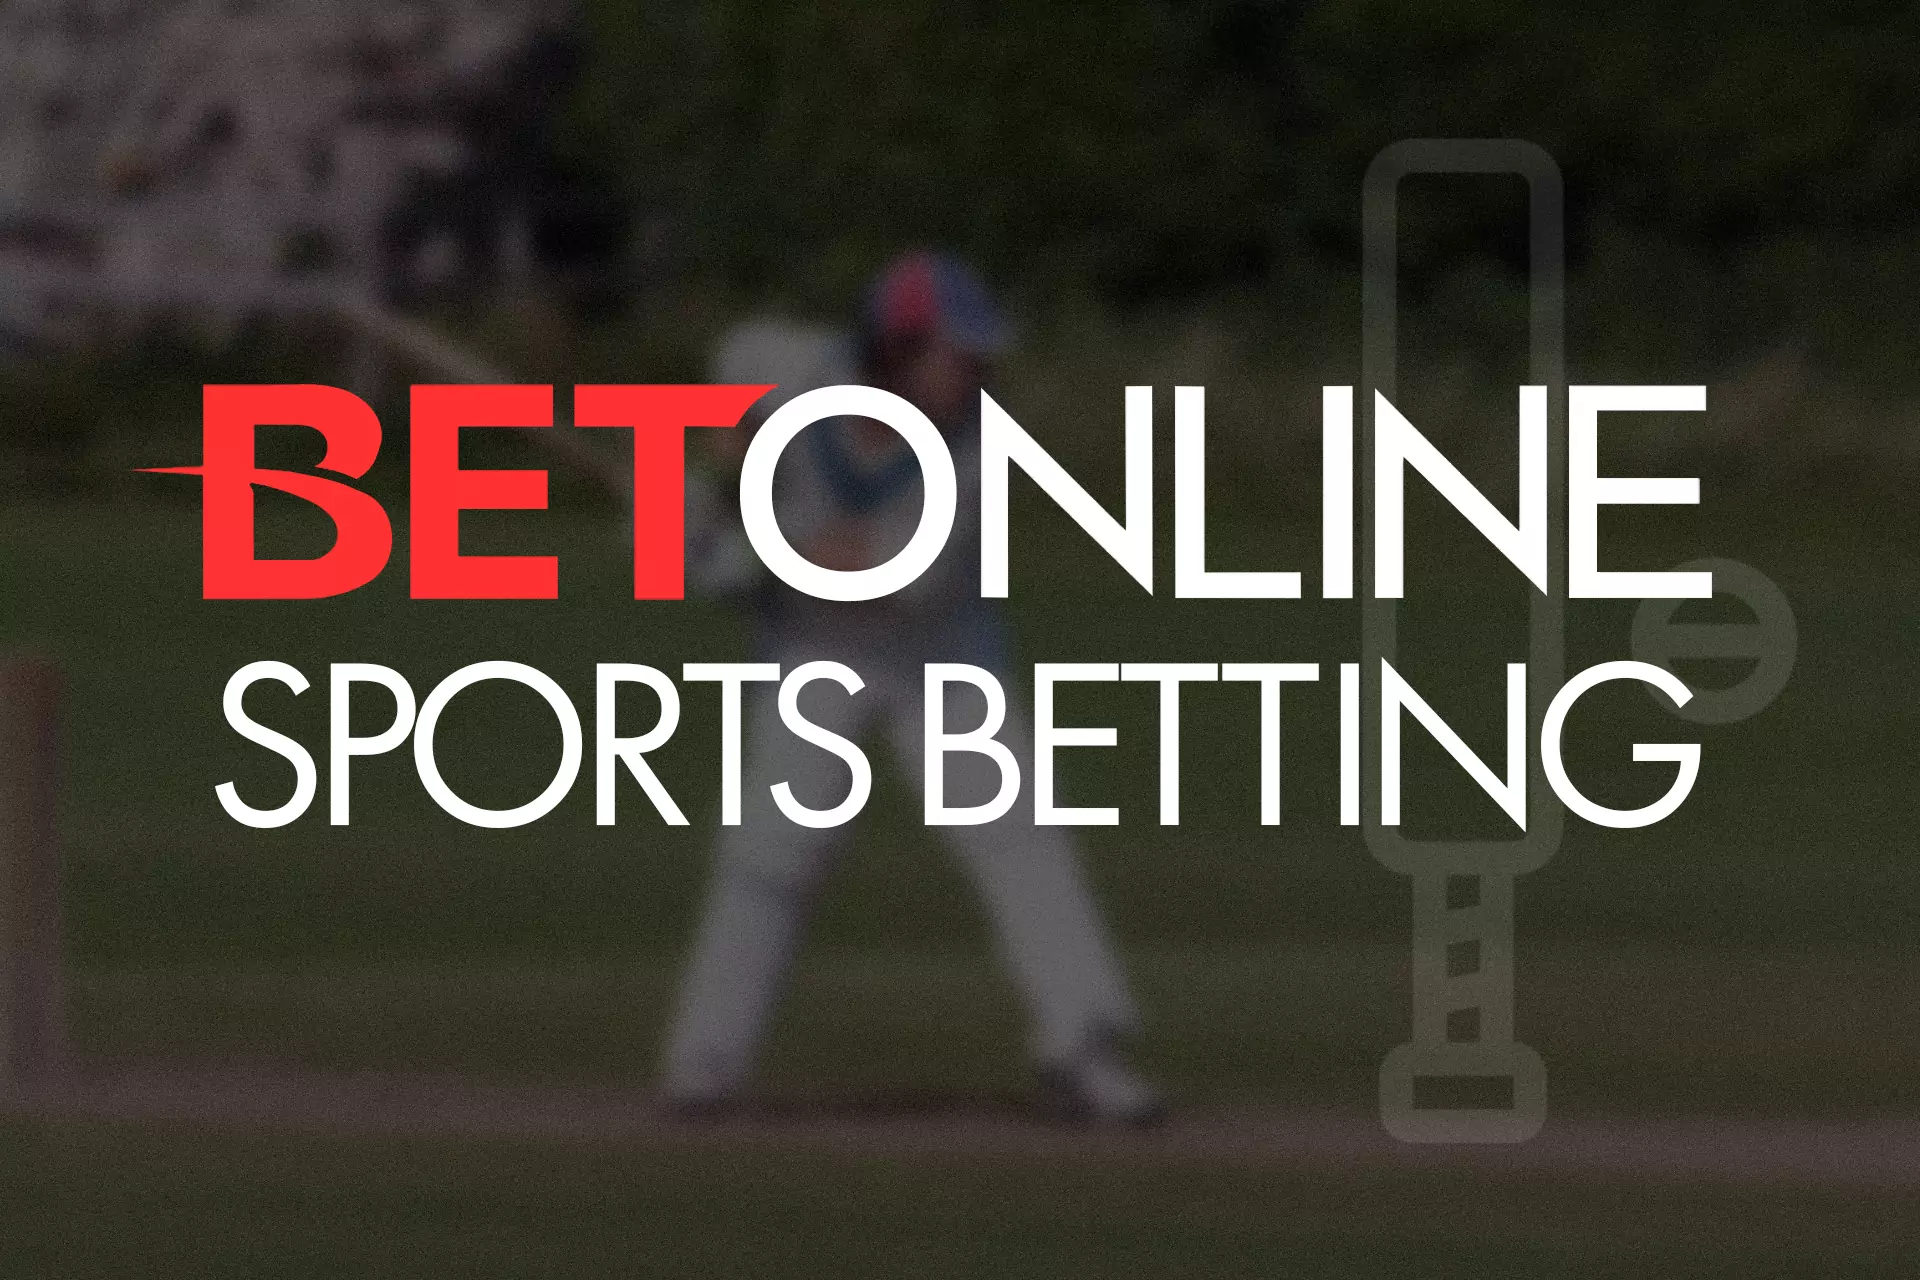 In the Sportsbook, you can bet on cricket and other sports important events and tournaments.